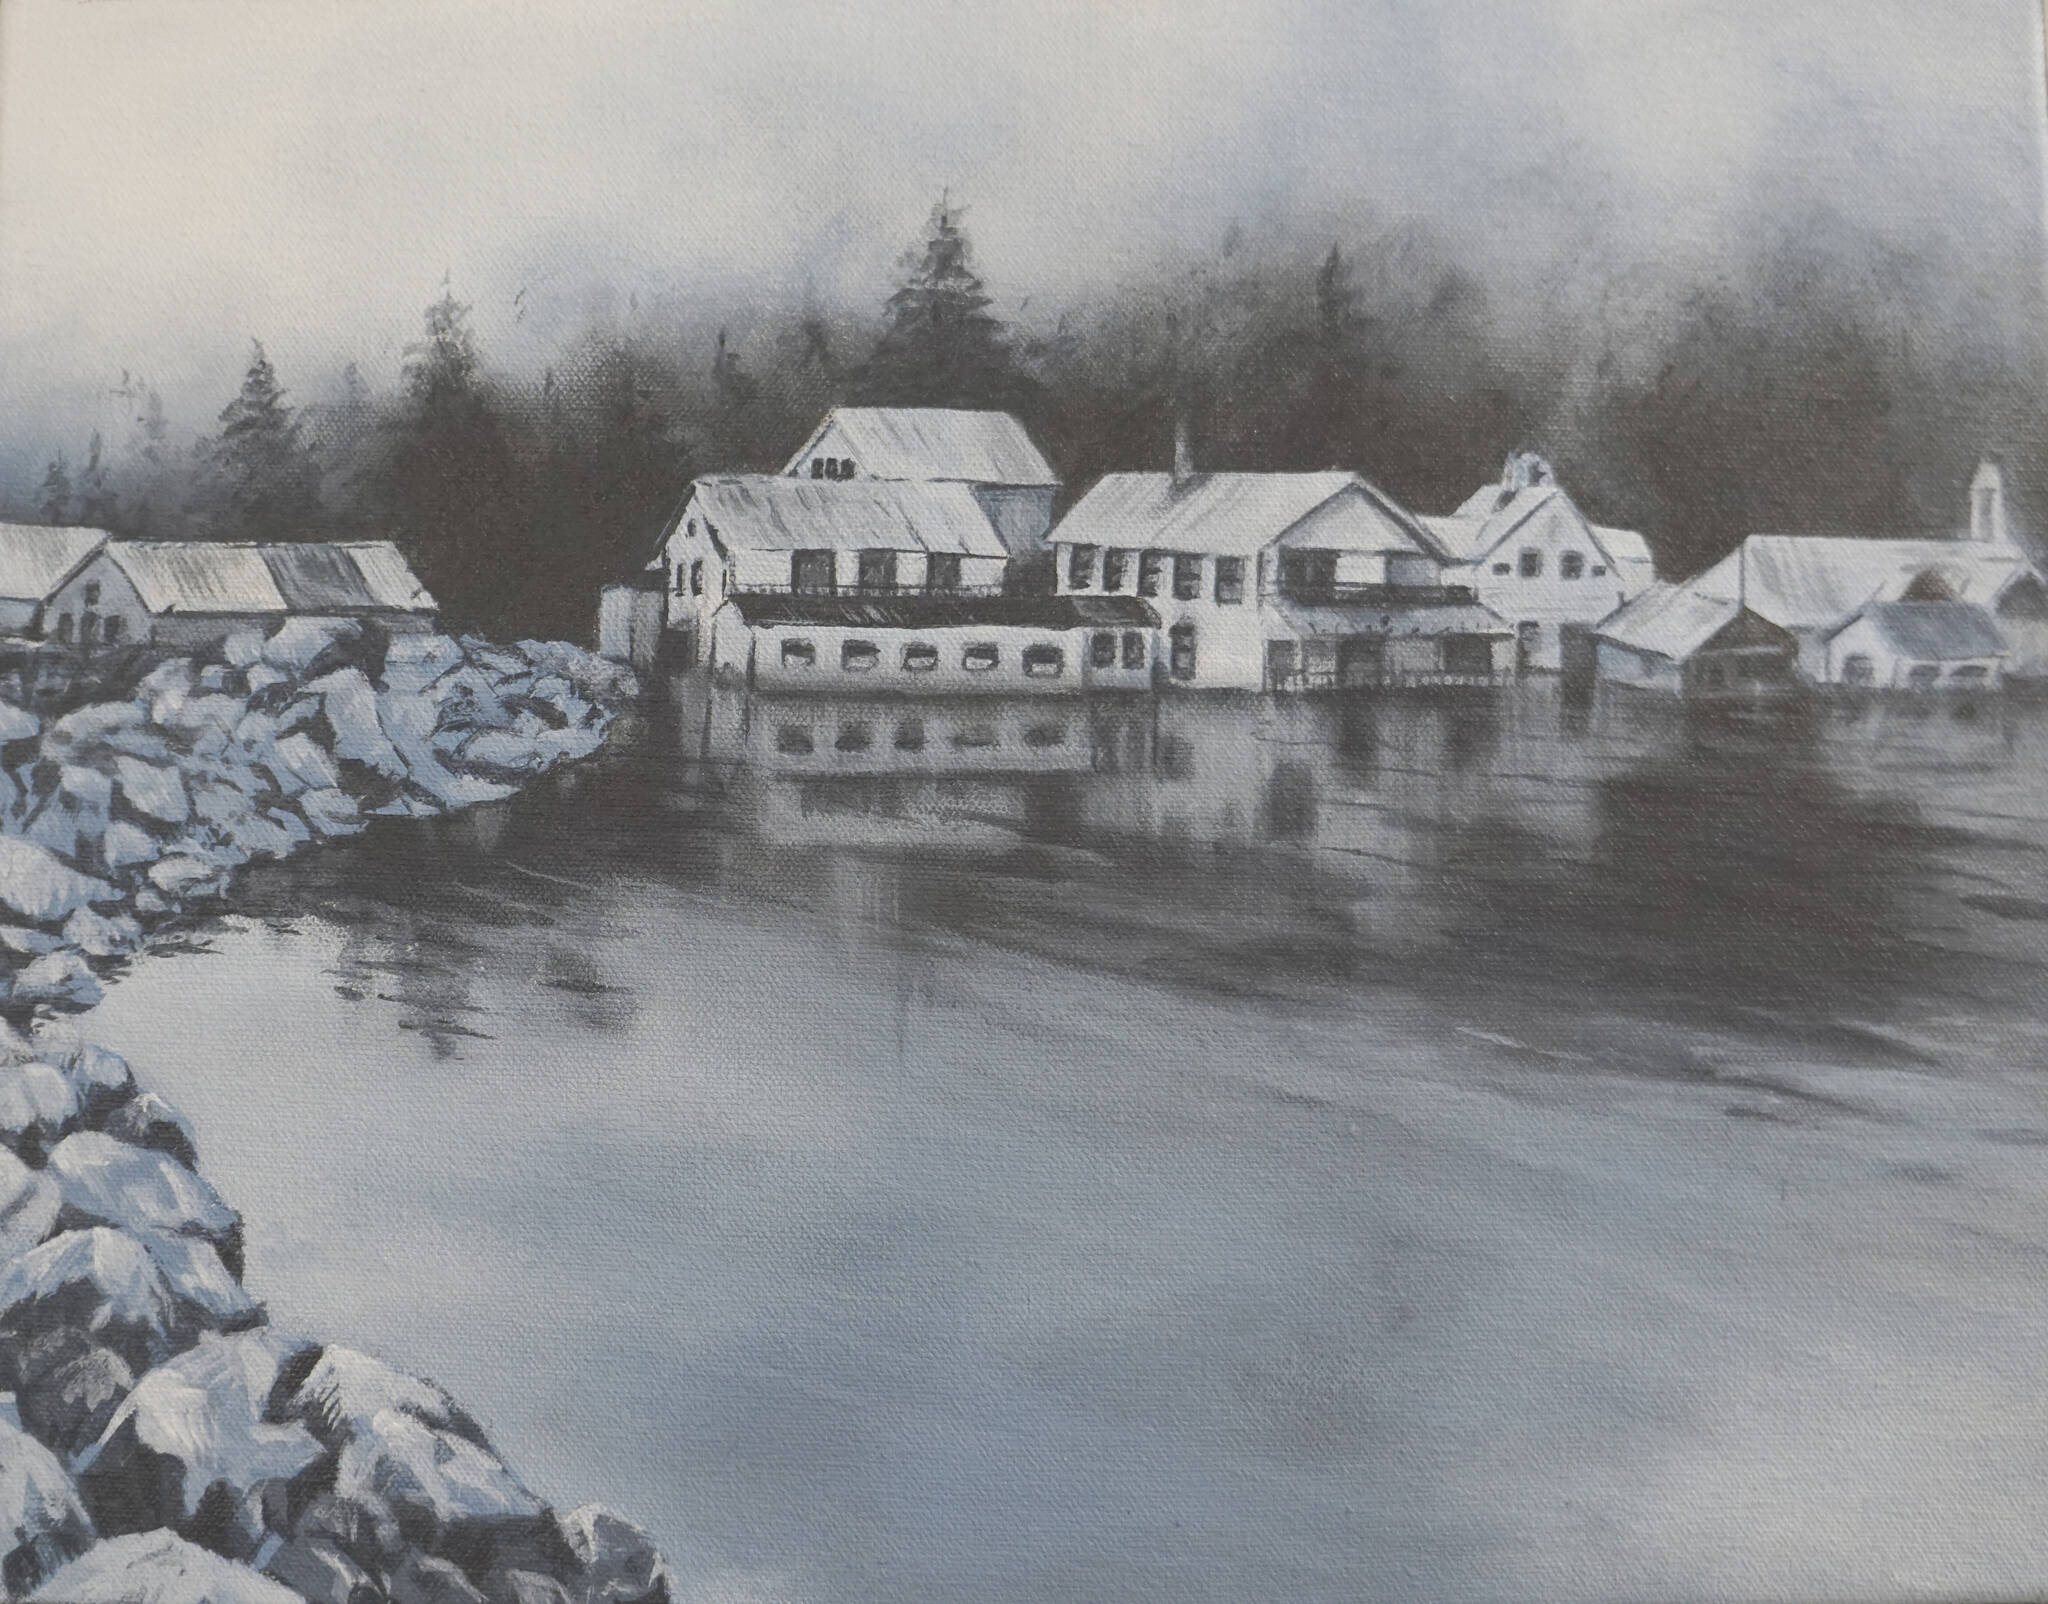 Kate Lochridge’s historical painting of Seldovia, Alaska, shows the old boardwalk after it got flooded by high tides after the 1964 Great Alaska Earthquake. Another painting shows the town before the high tide. (Photo by MIchael Armstrong/Homer News)